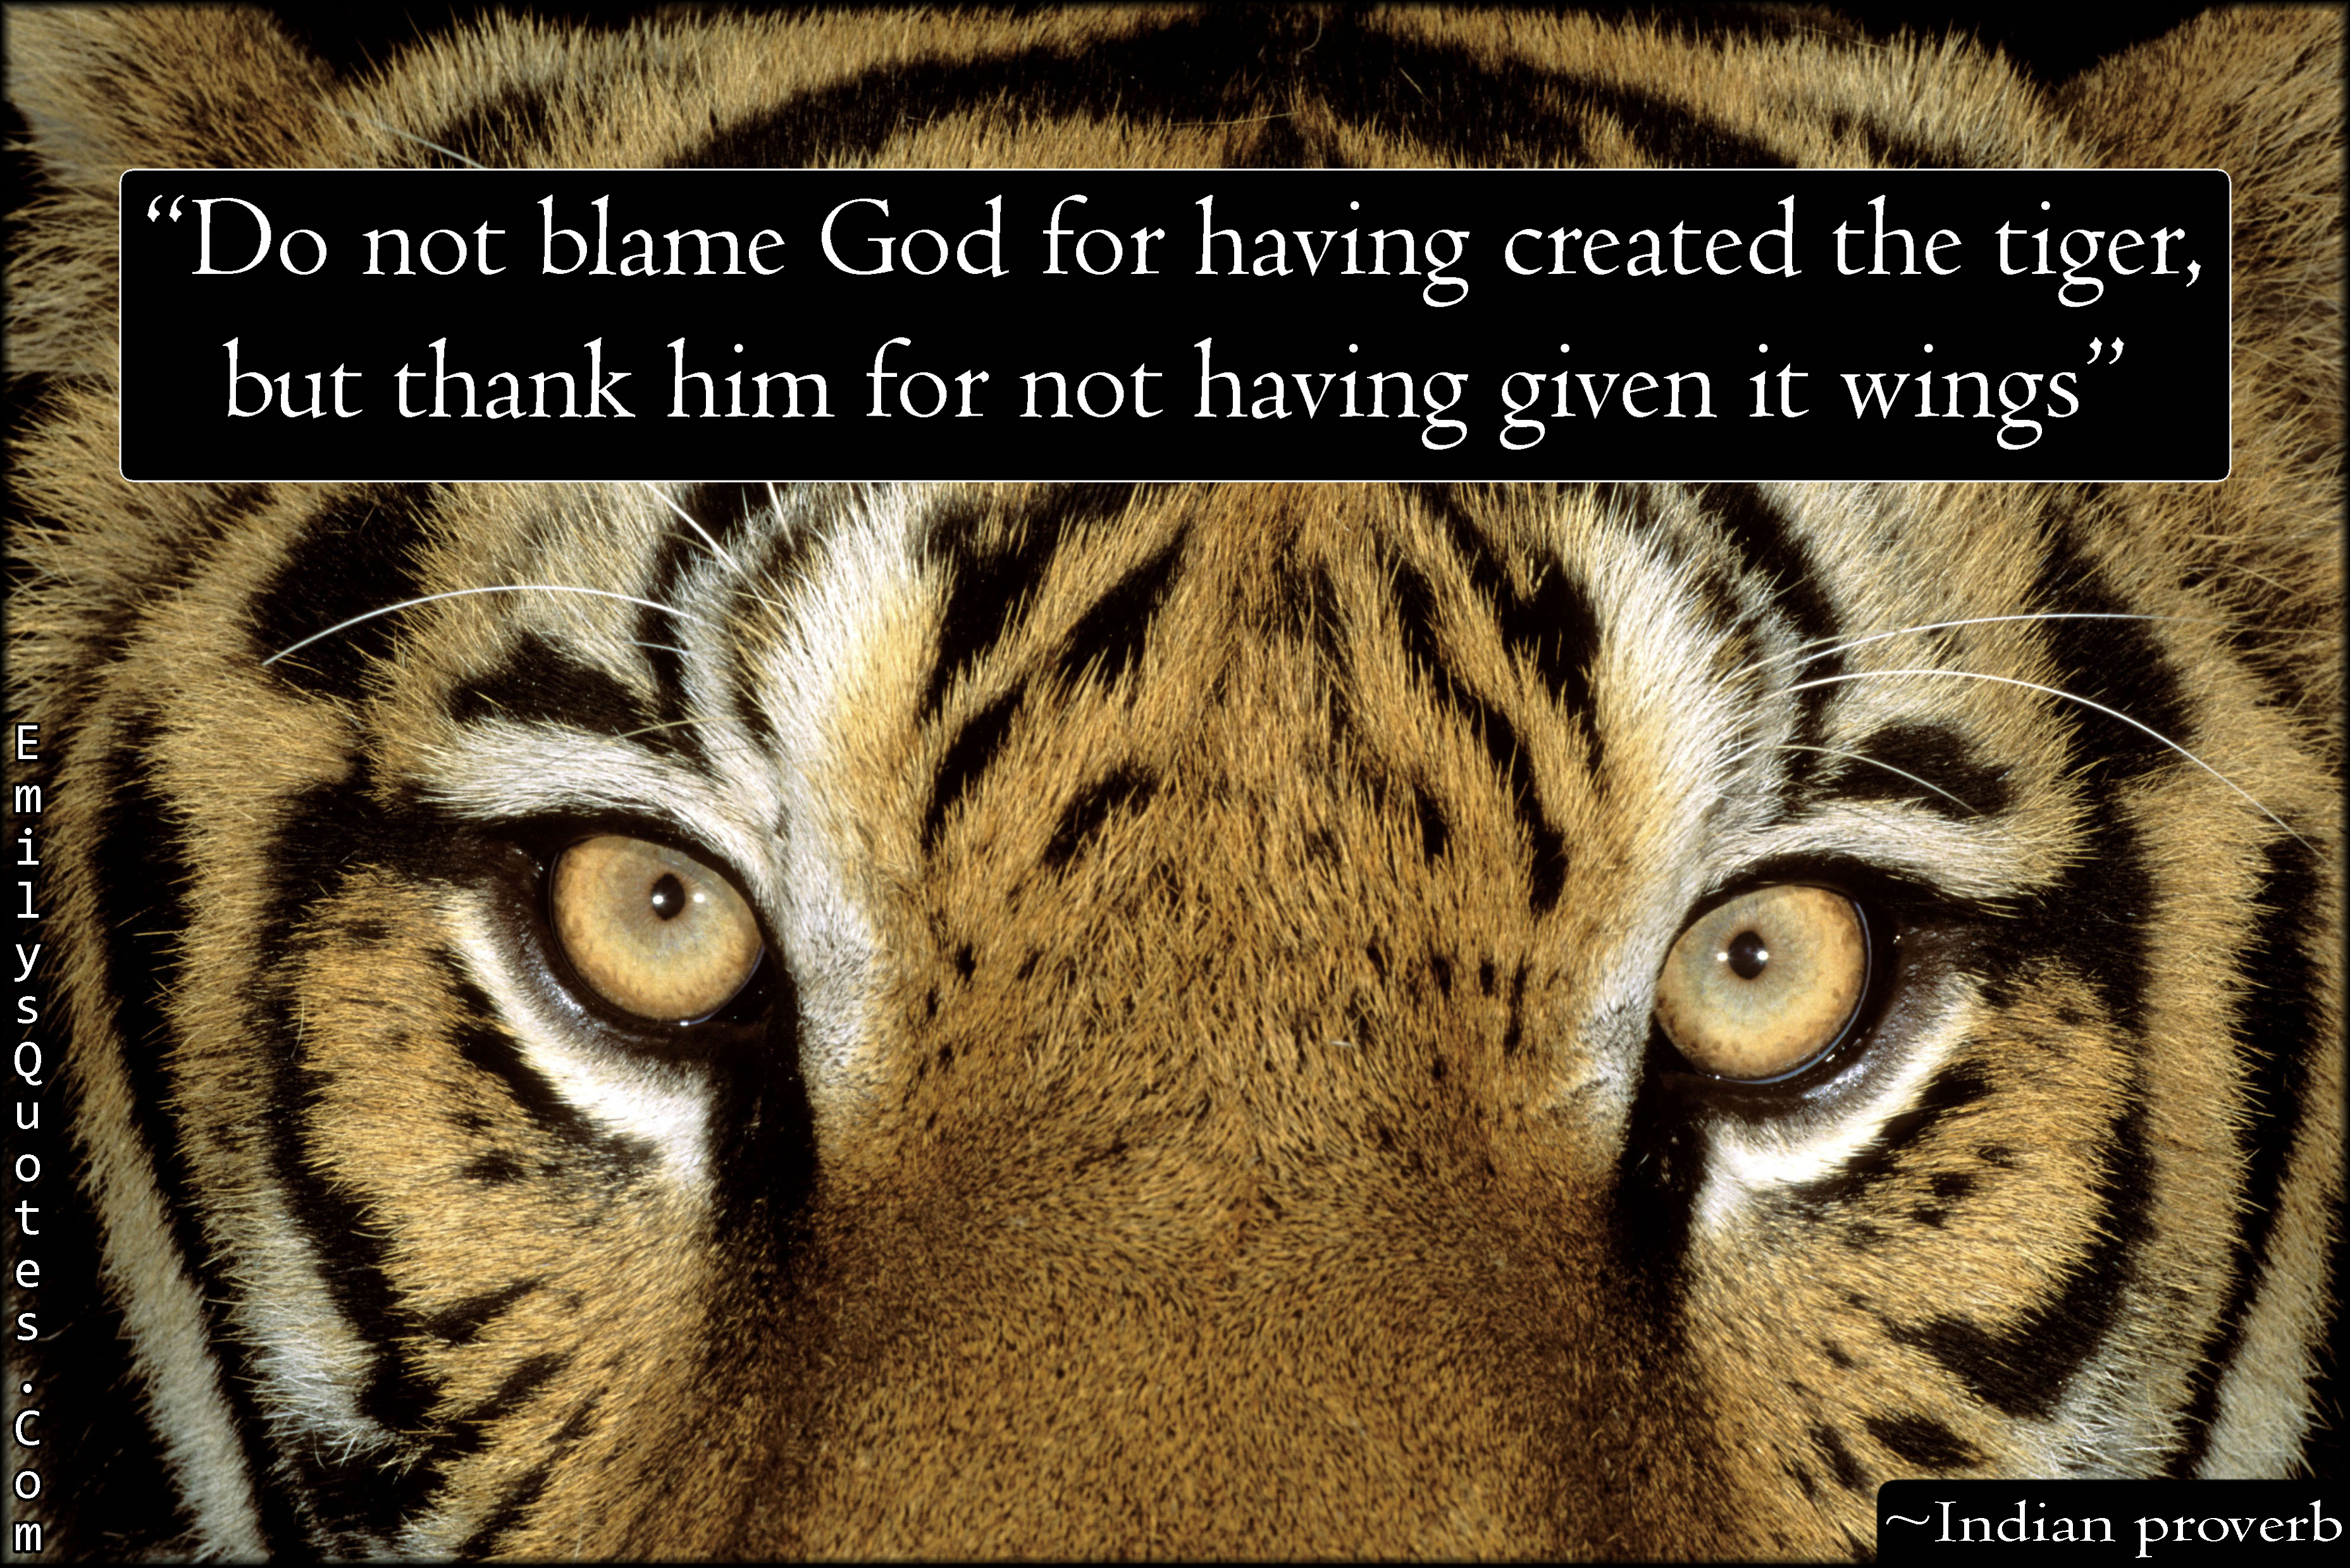 Do not blame God for having created the tiger, but thank him for not having given it wings